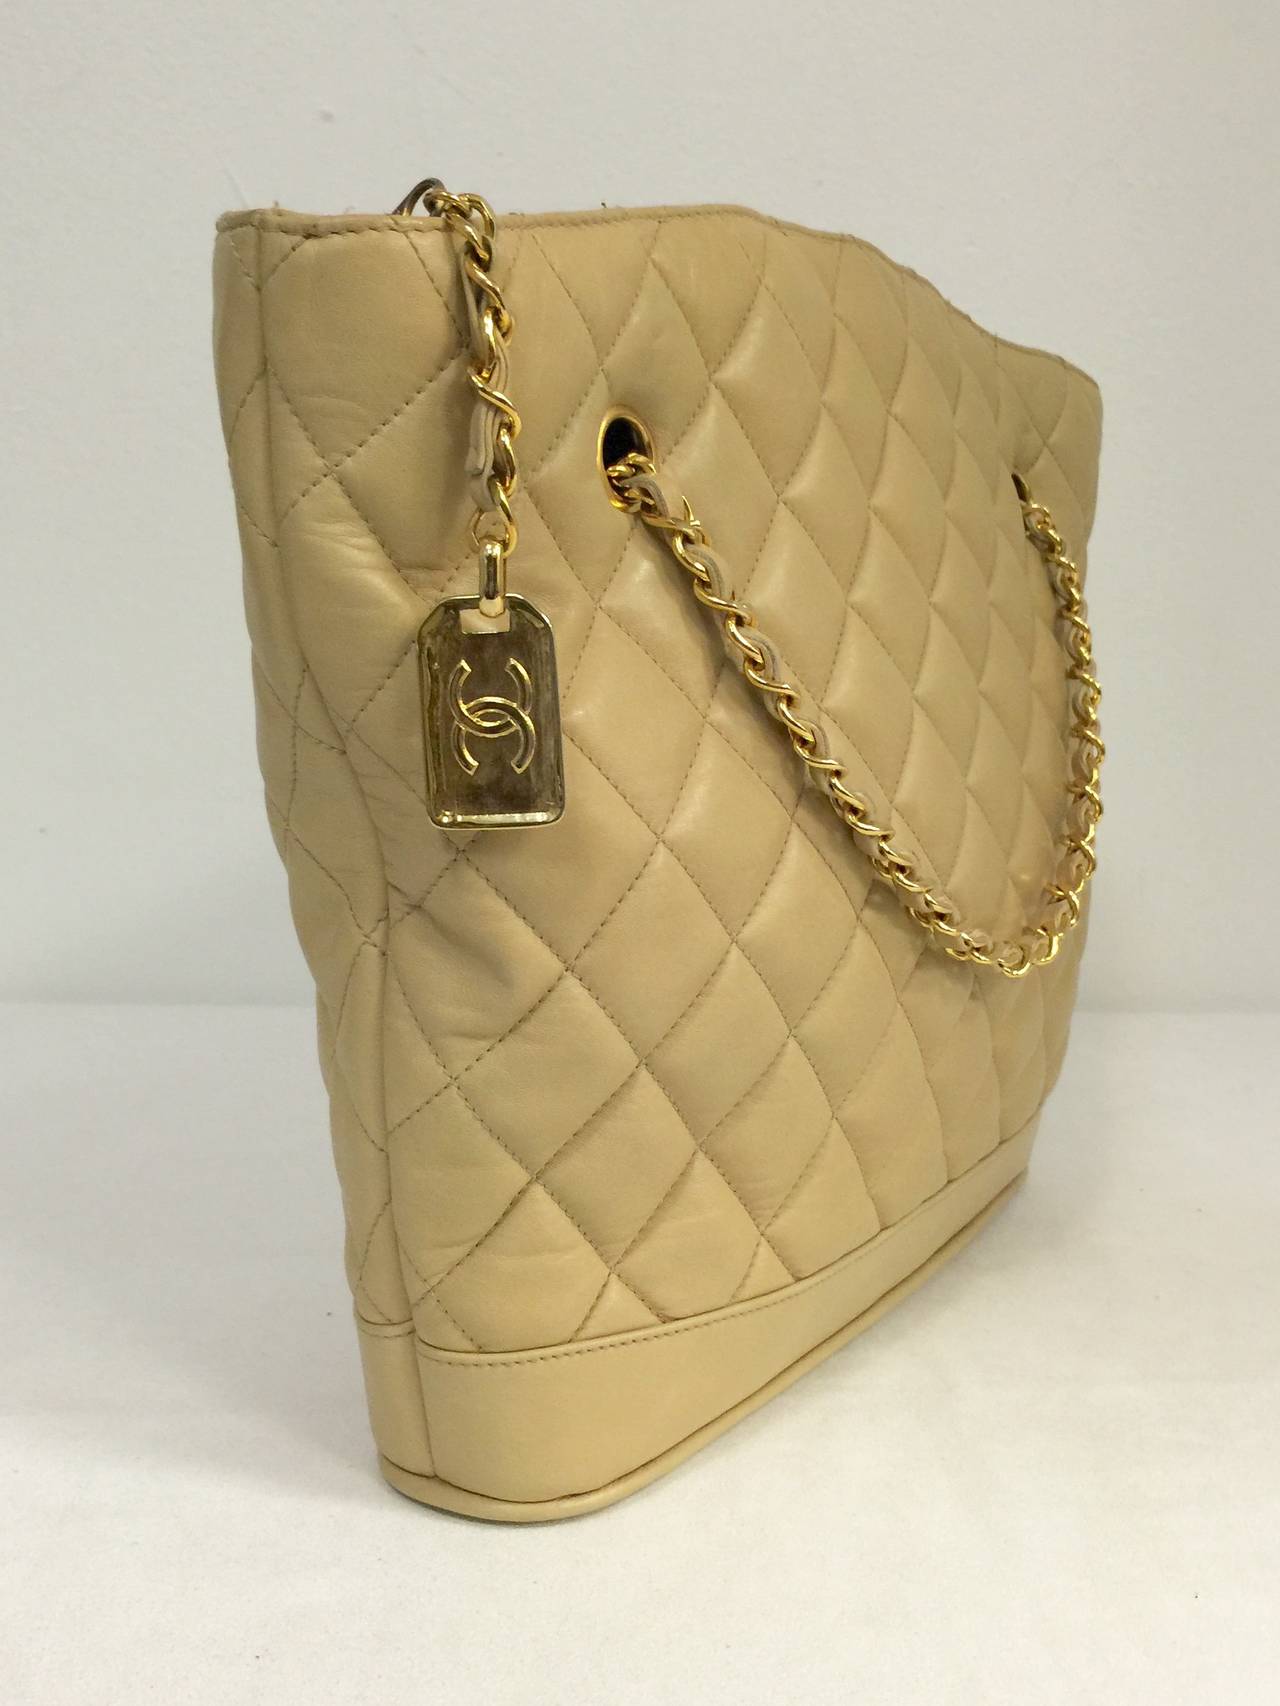 Vintage Chanel Tan Quilted Lambskin Shoulder Bag is highly prized.  Butter-soft tan lambskin, in signature stitched diamond pattern, has become as legendary as Coco herself!  Crafted between 1989 and 1991, bag features top zippered closure, double